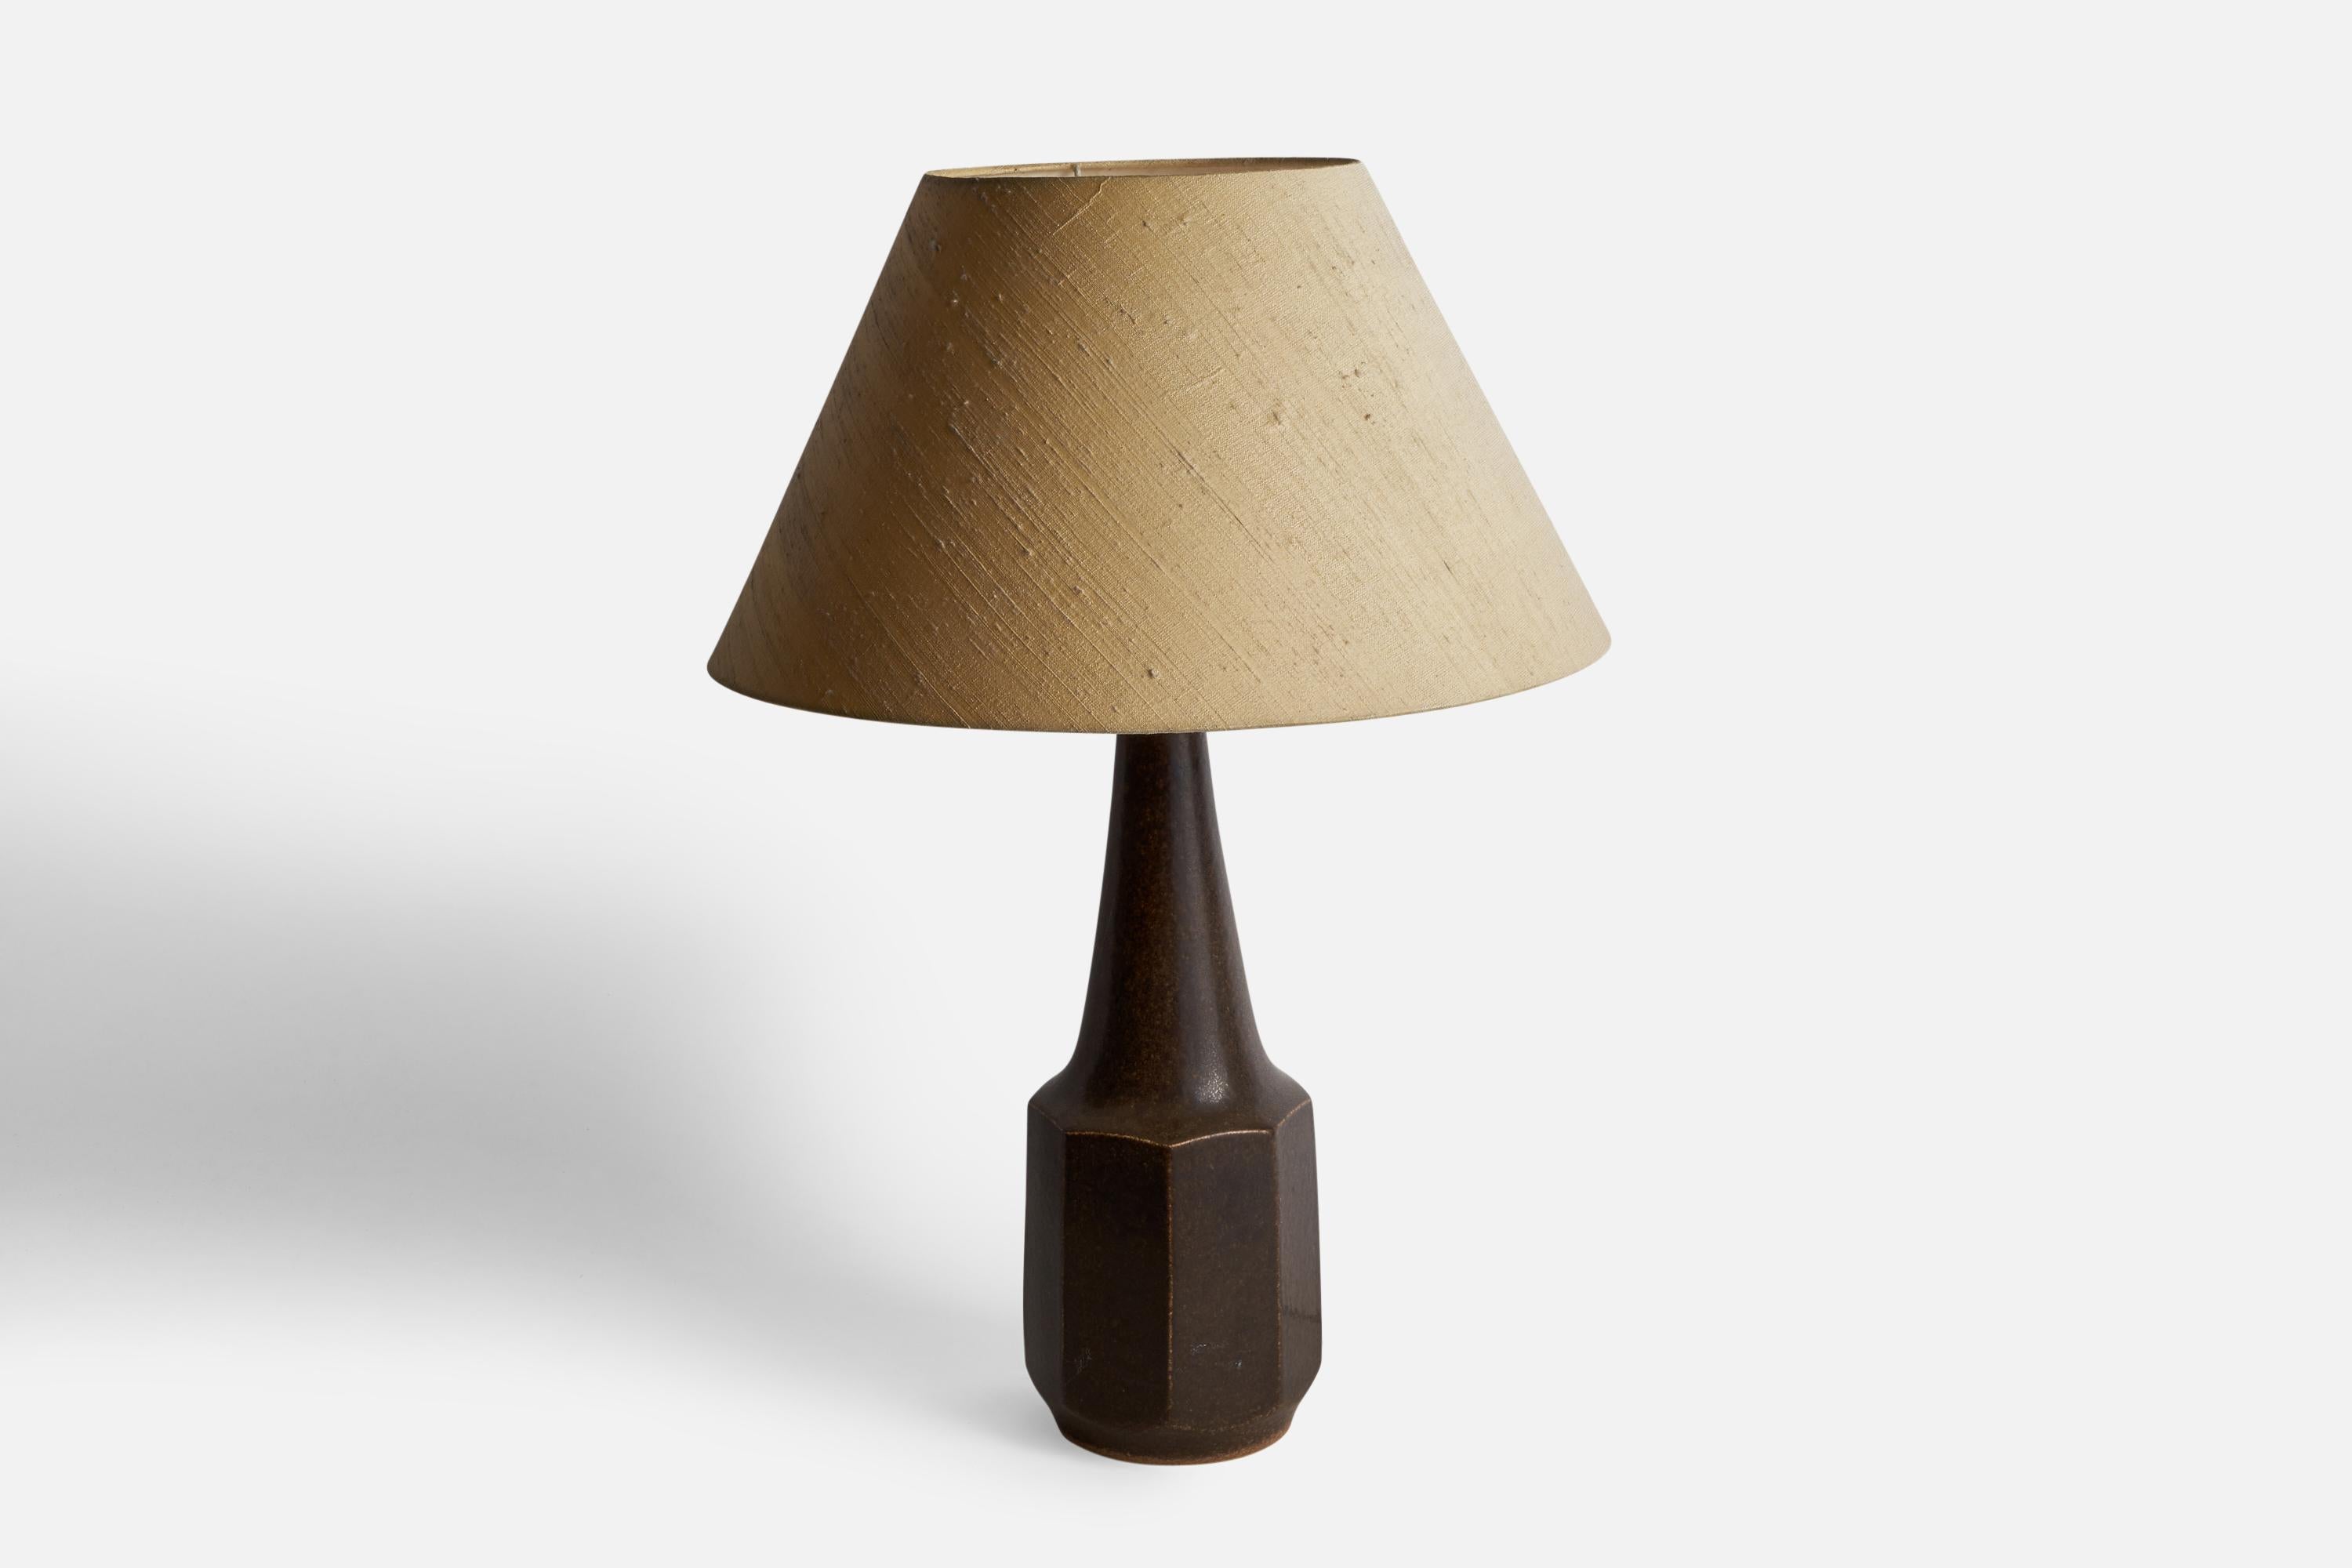 A brown-glazed stoneware, brass and beige fabric table lamp designed by Marianne Starck and produced by Michael Andersen, Bornholm, Denmark, 1960s.

Overall Dimensions (inches): 22.55” H x 15.9” Diameter
Bulb Specifications: E-26 Bulb
Number of